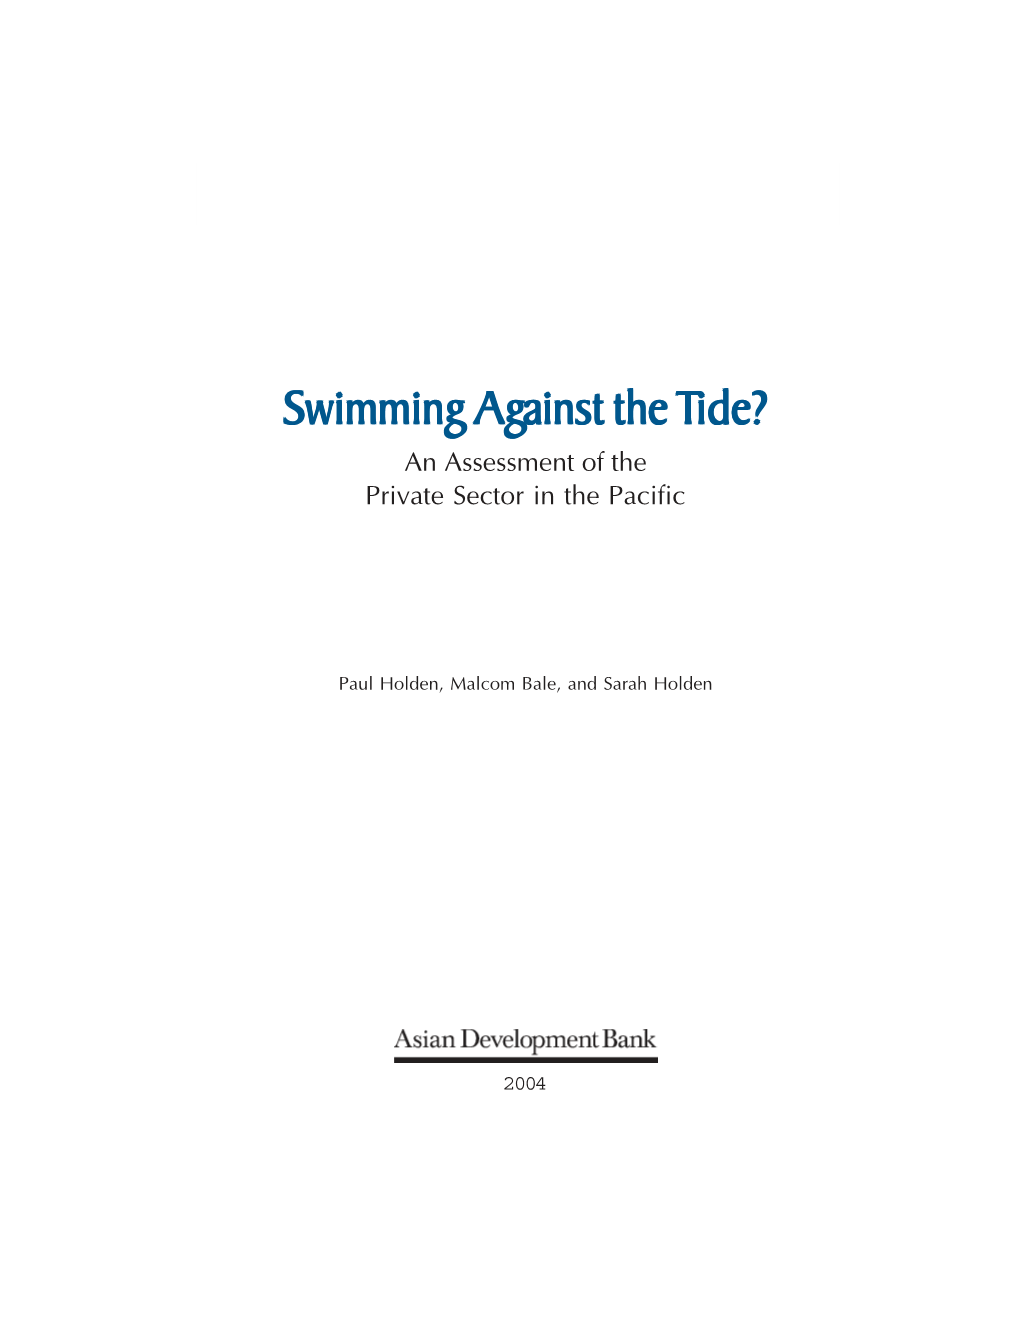 Swimming Against the Tide?: an Assessment of the Private Sector in the Pacific